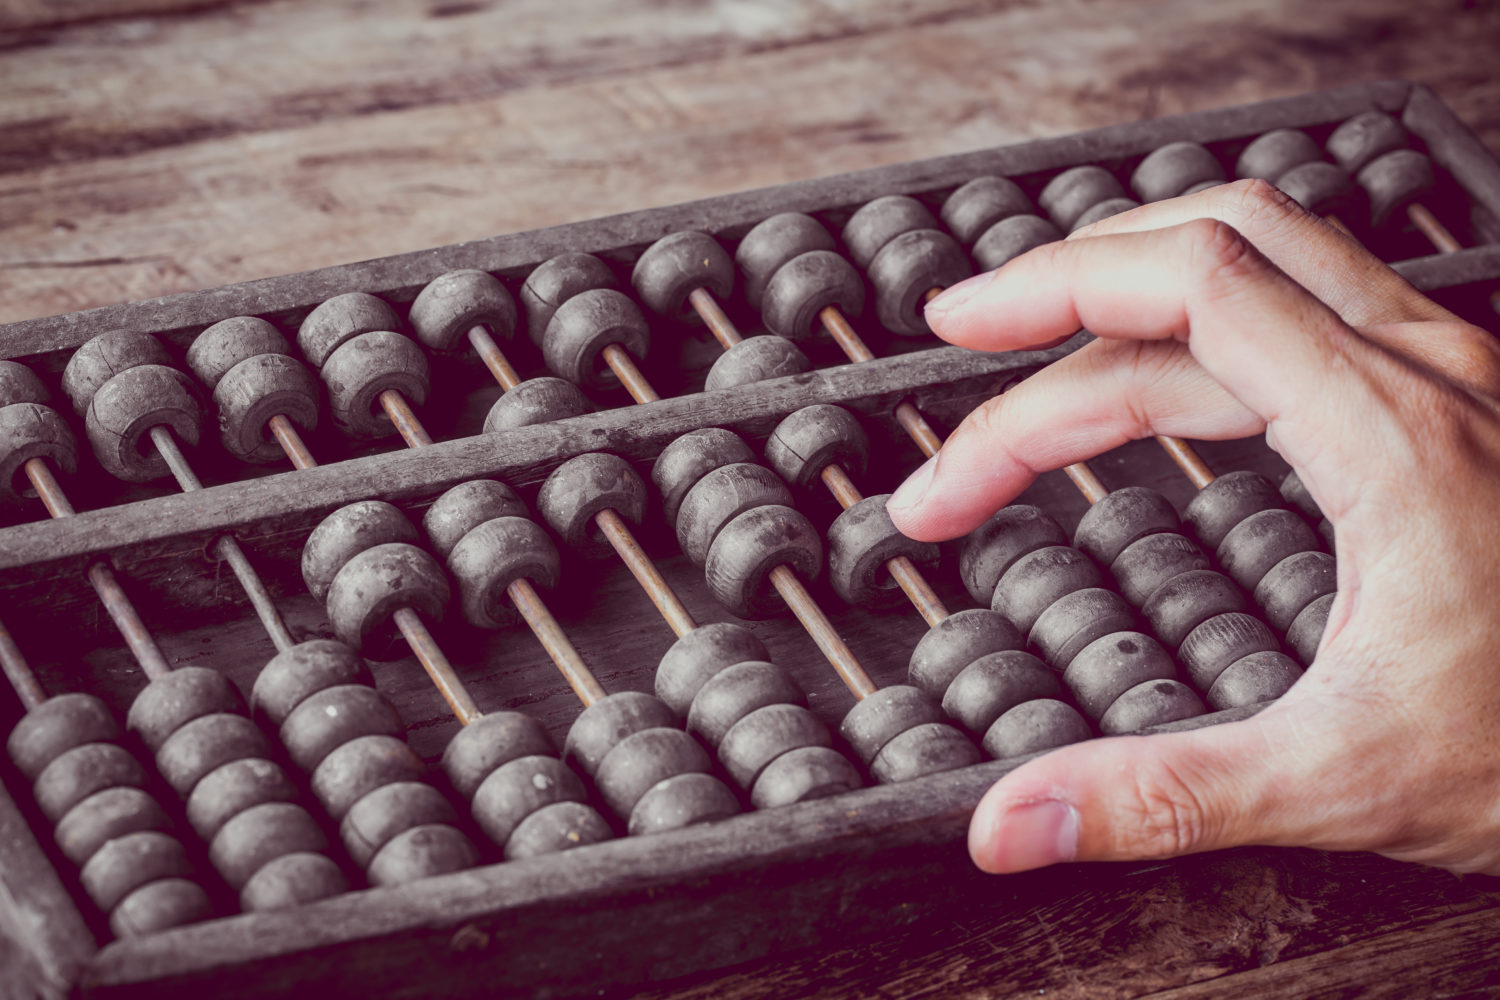 Abacus counting